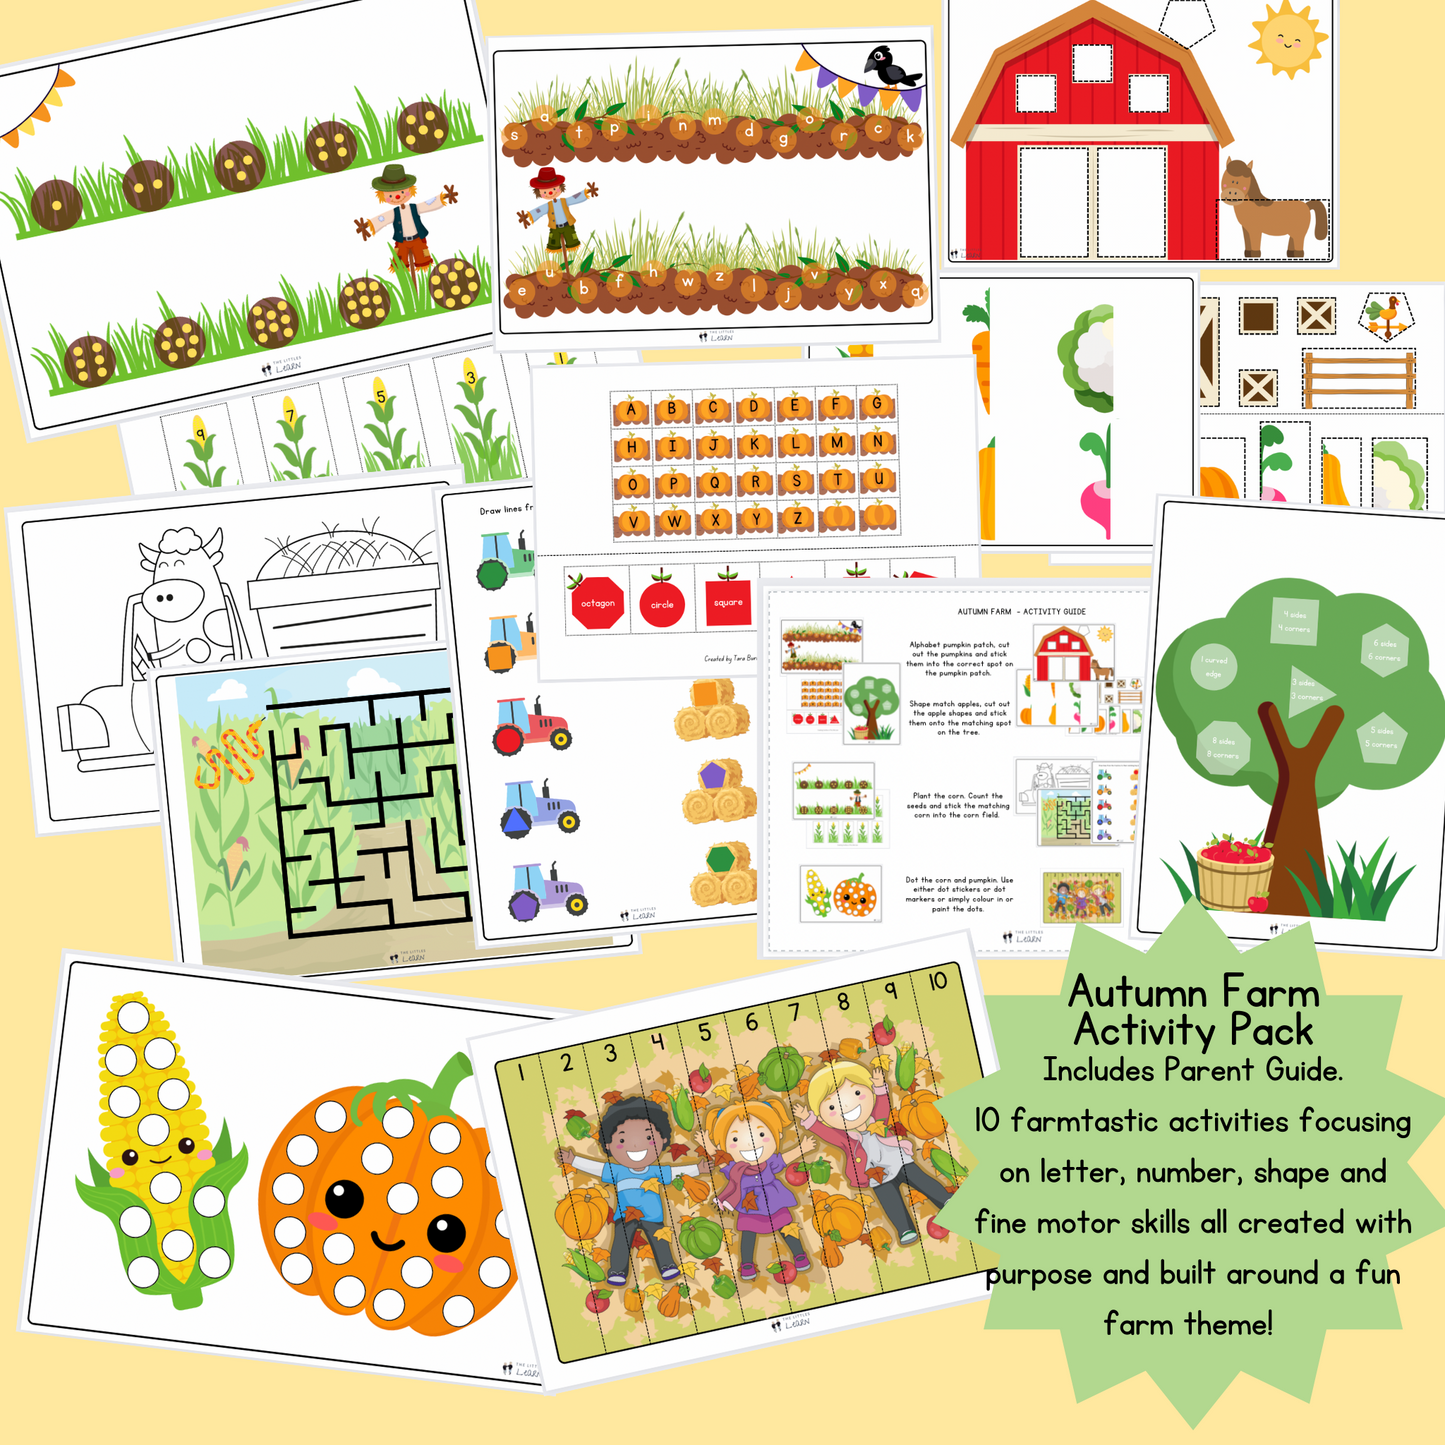 10 fall themed activities for children featuring brightly coloured pictures of farm scenes, a pumpkin patch, corn field, apple tree and vegetables.